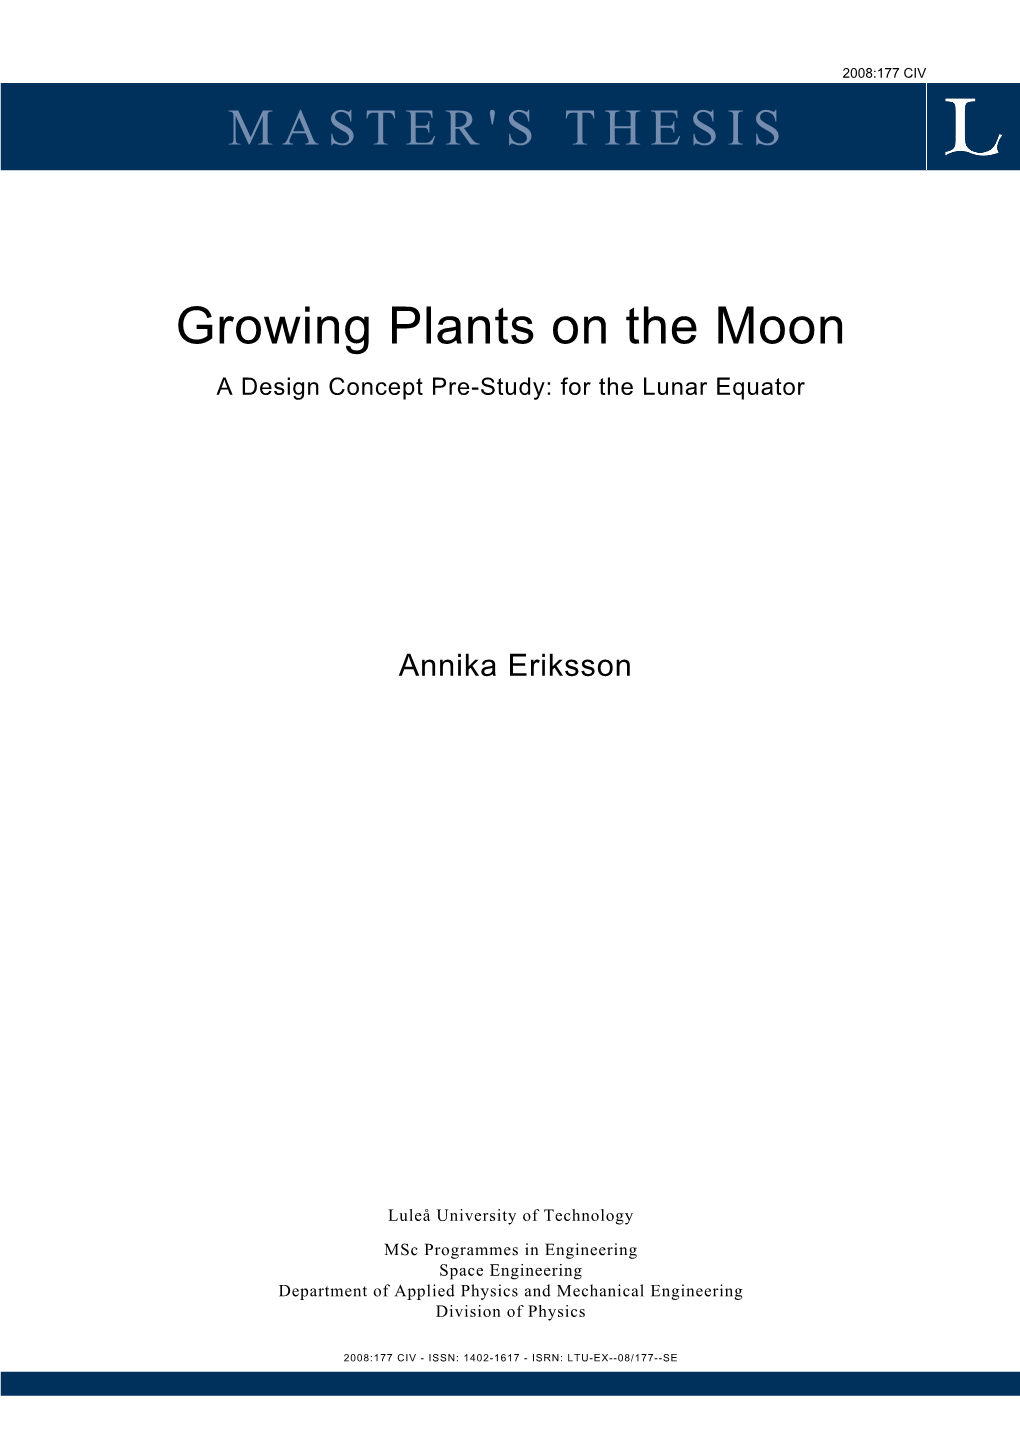 MASTER's THESIS Growing Plants on the Moon